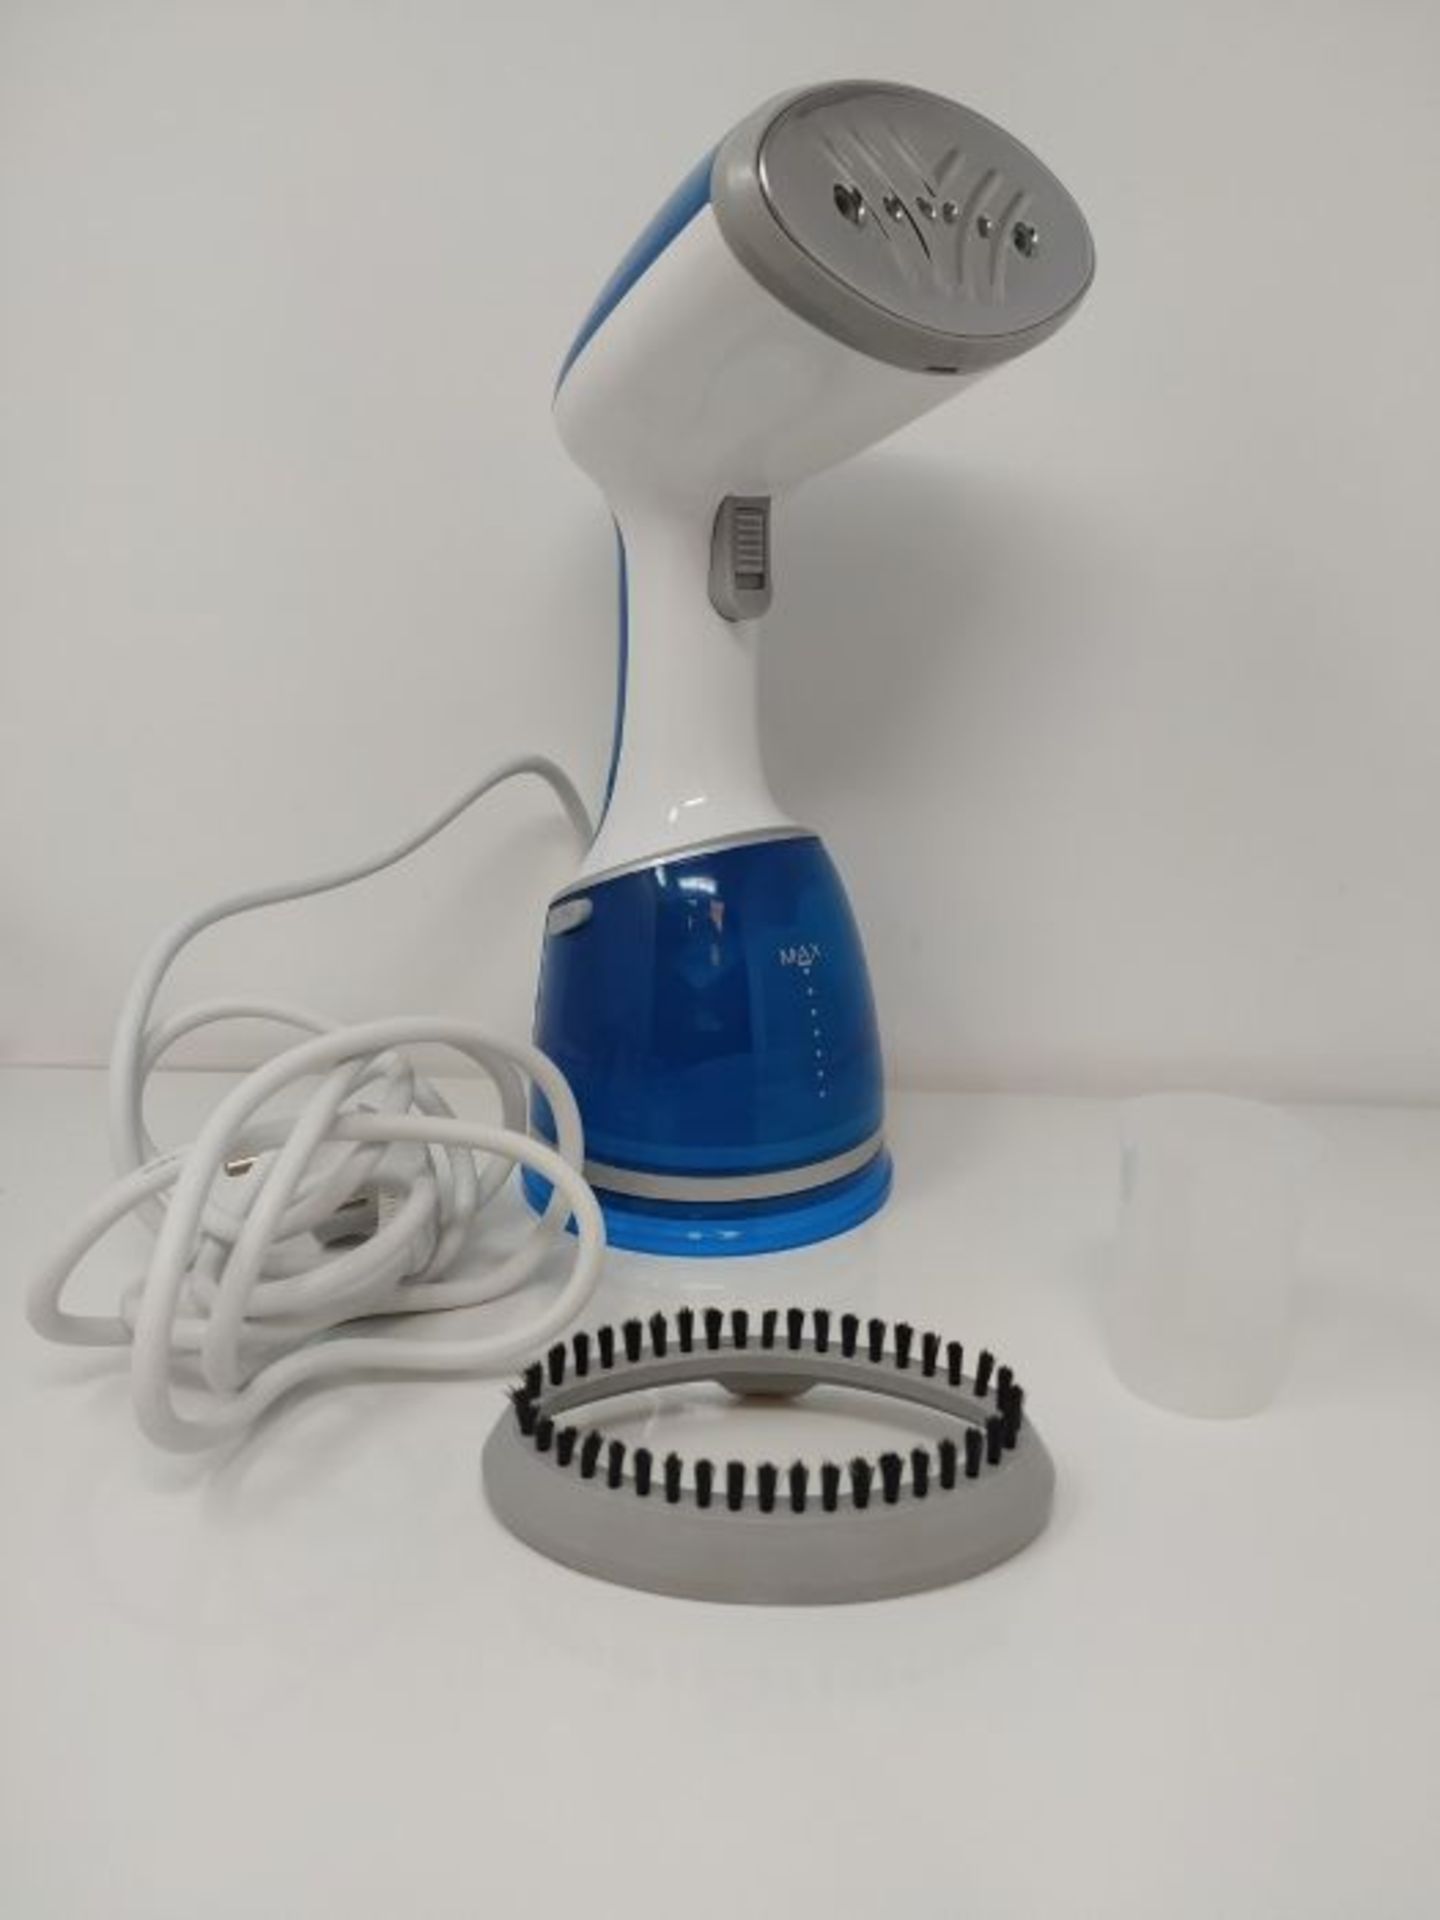 Vertical steam iron - Image 3 of 3